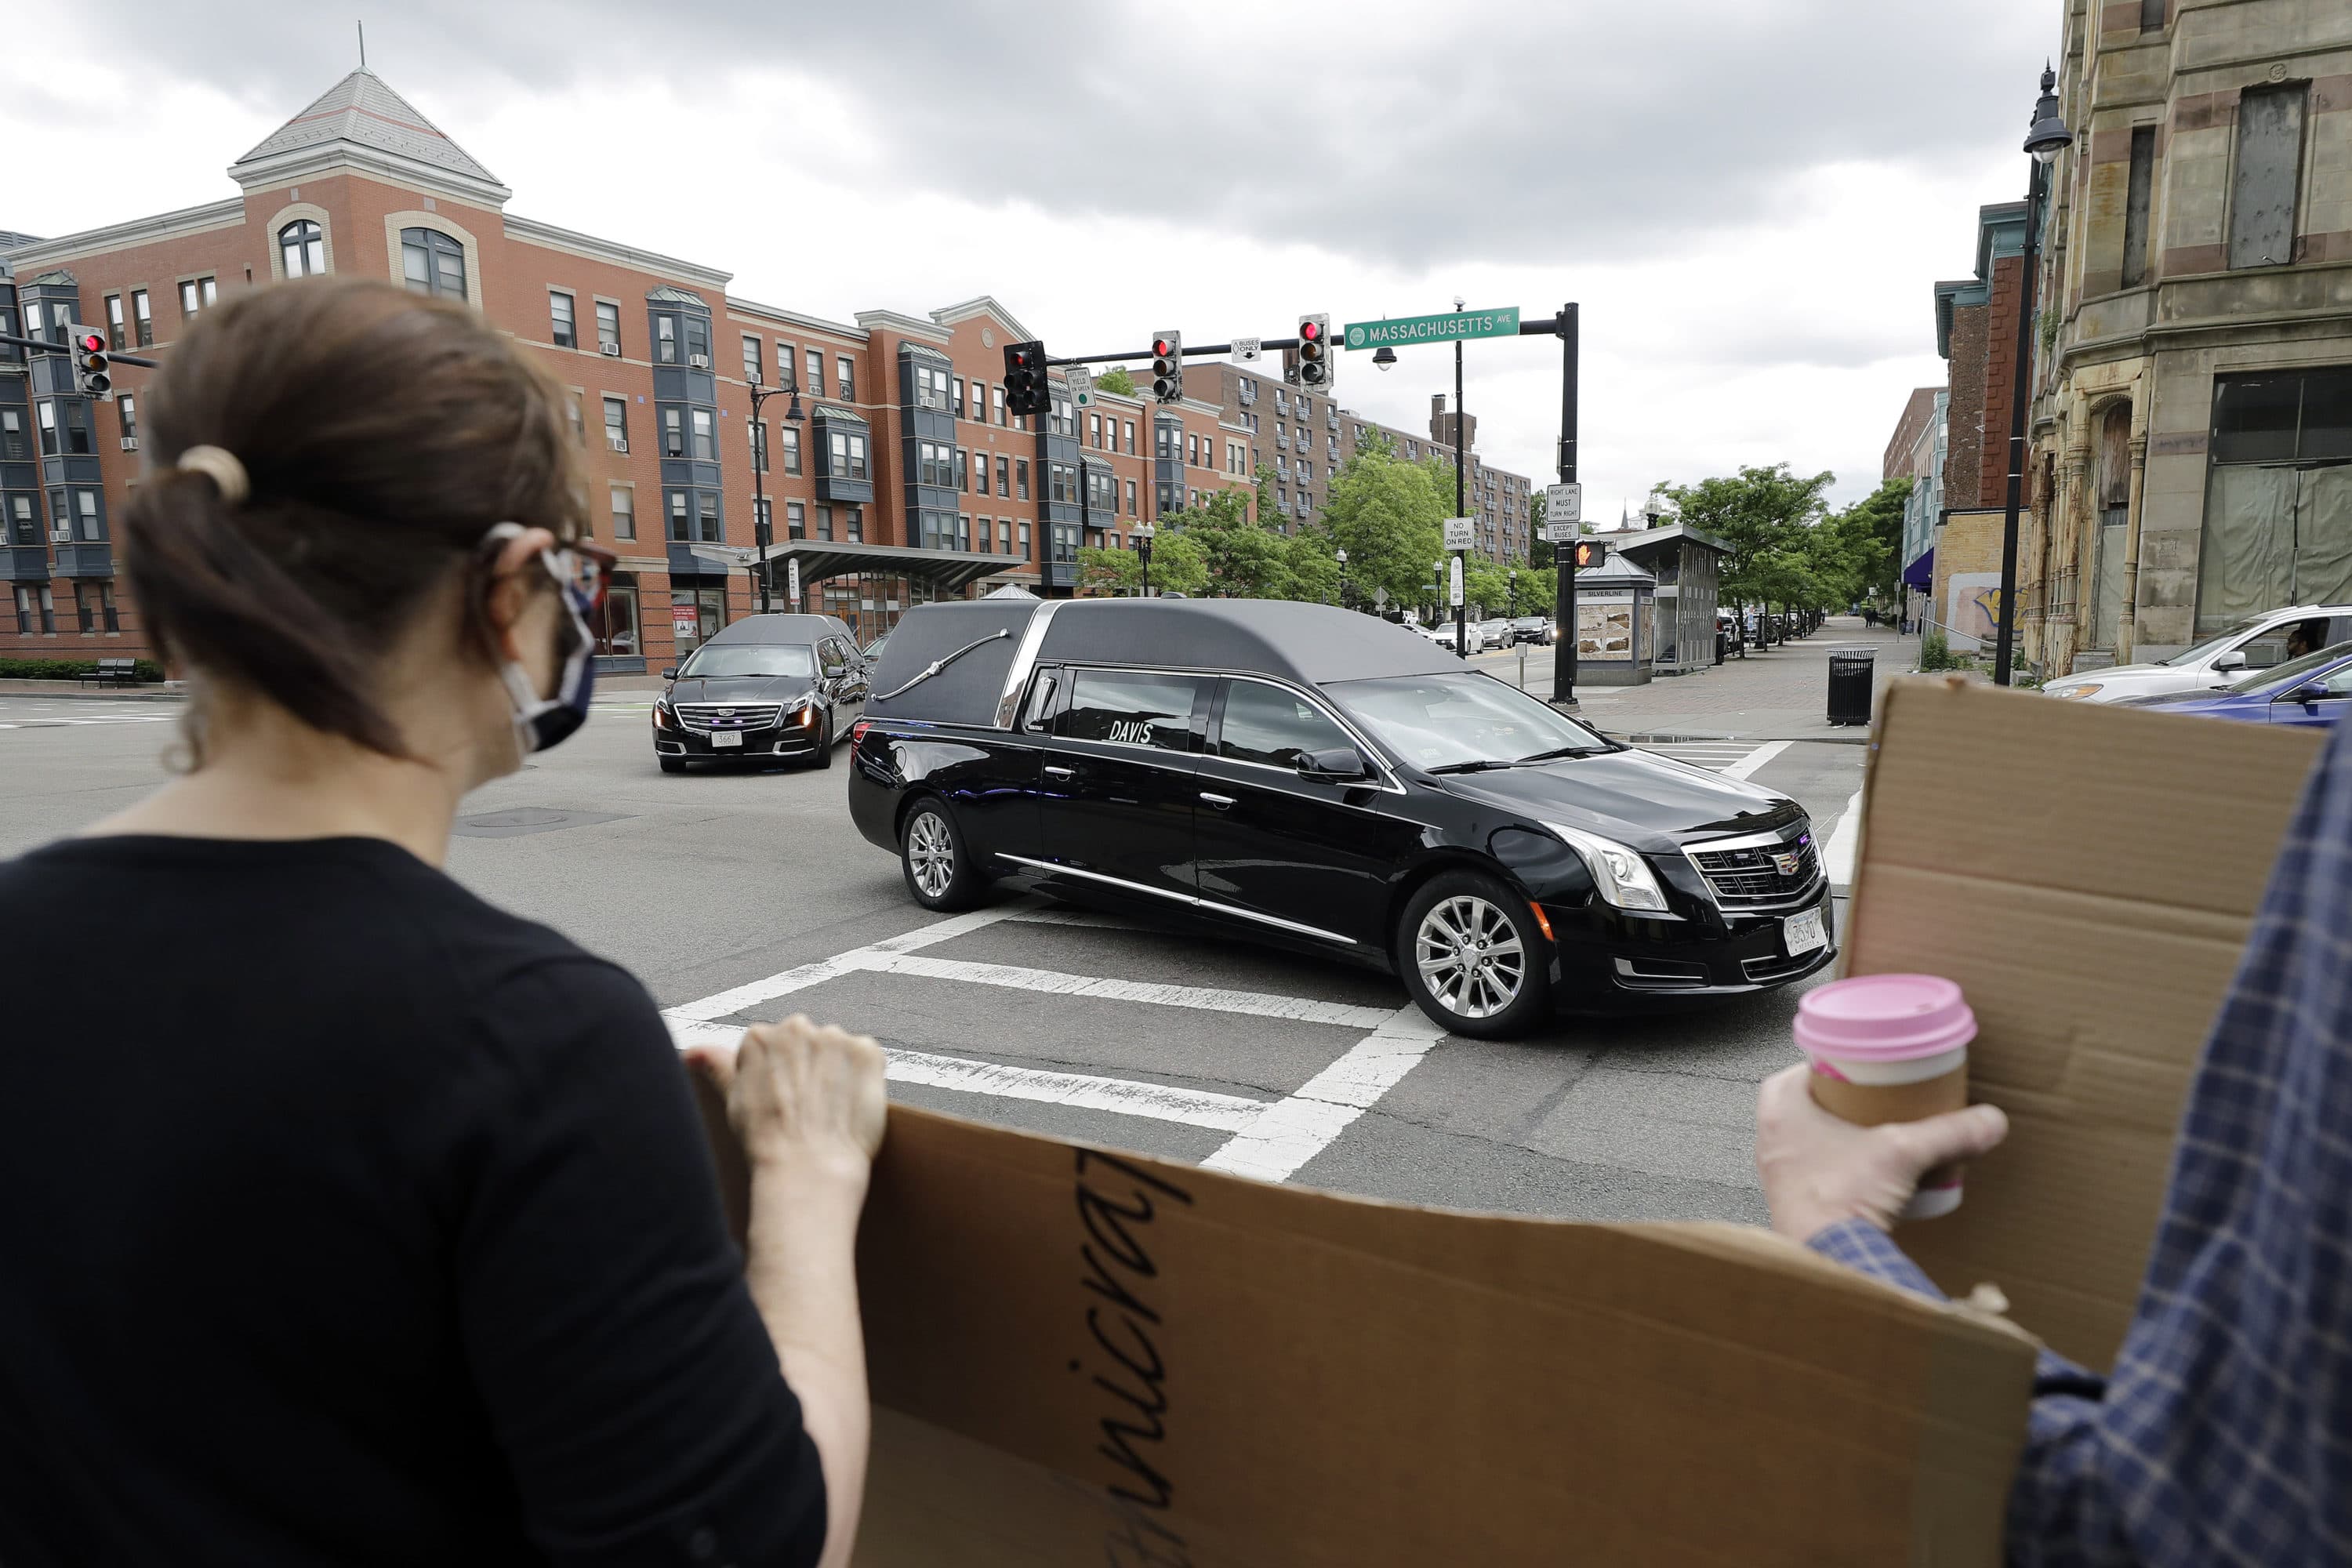 People display placards Sunday while watching a procession of vehicles, including three hearses meant to honor fallen George Floyd, Breonna Taylor and Ahmaud Arbery, as it makes its way through Boston. (Steven Senne/AP)